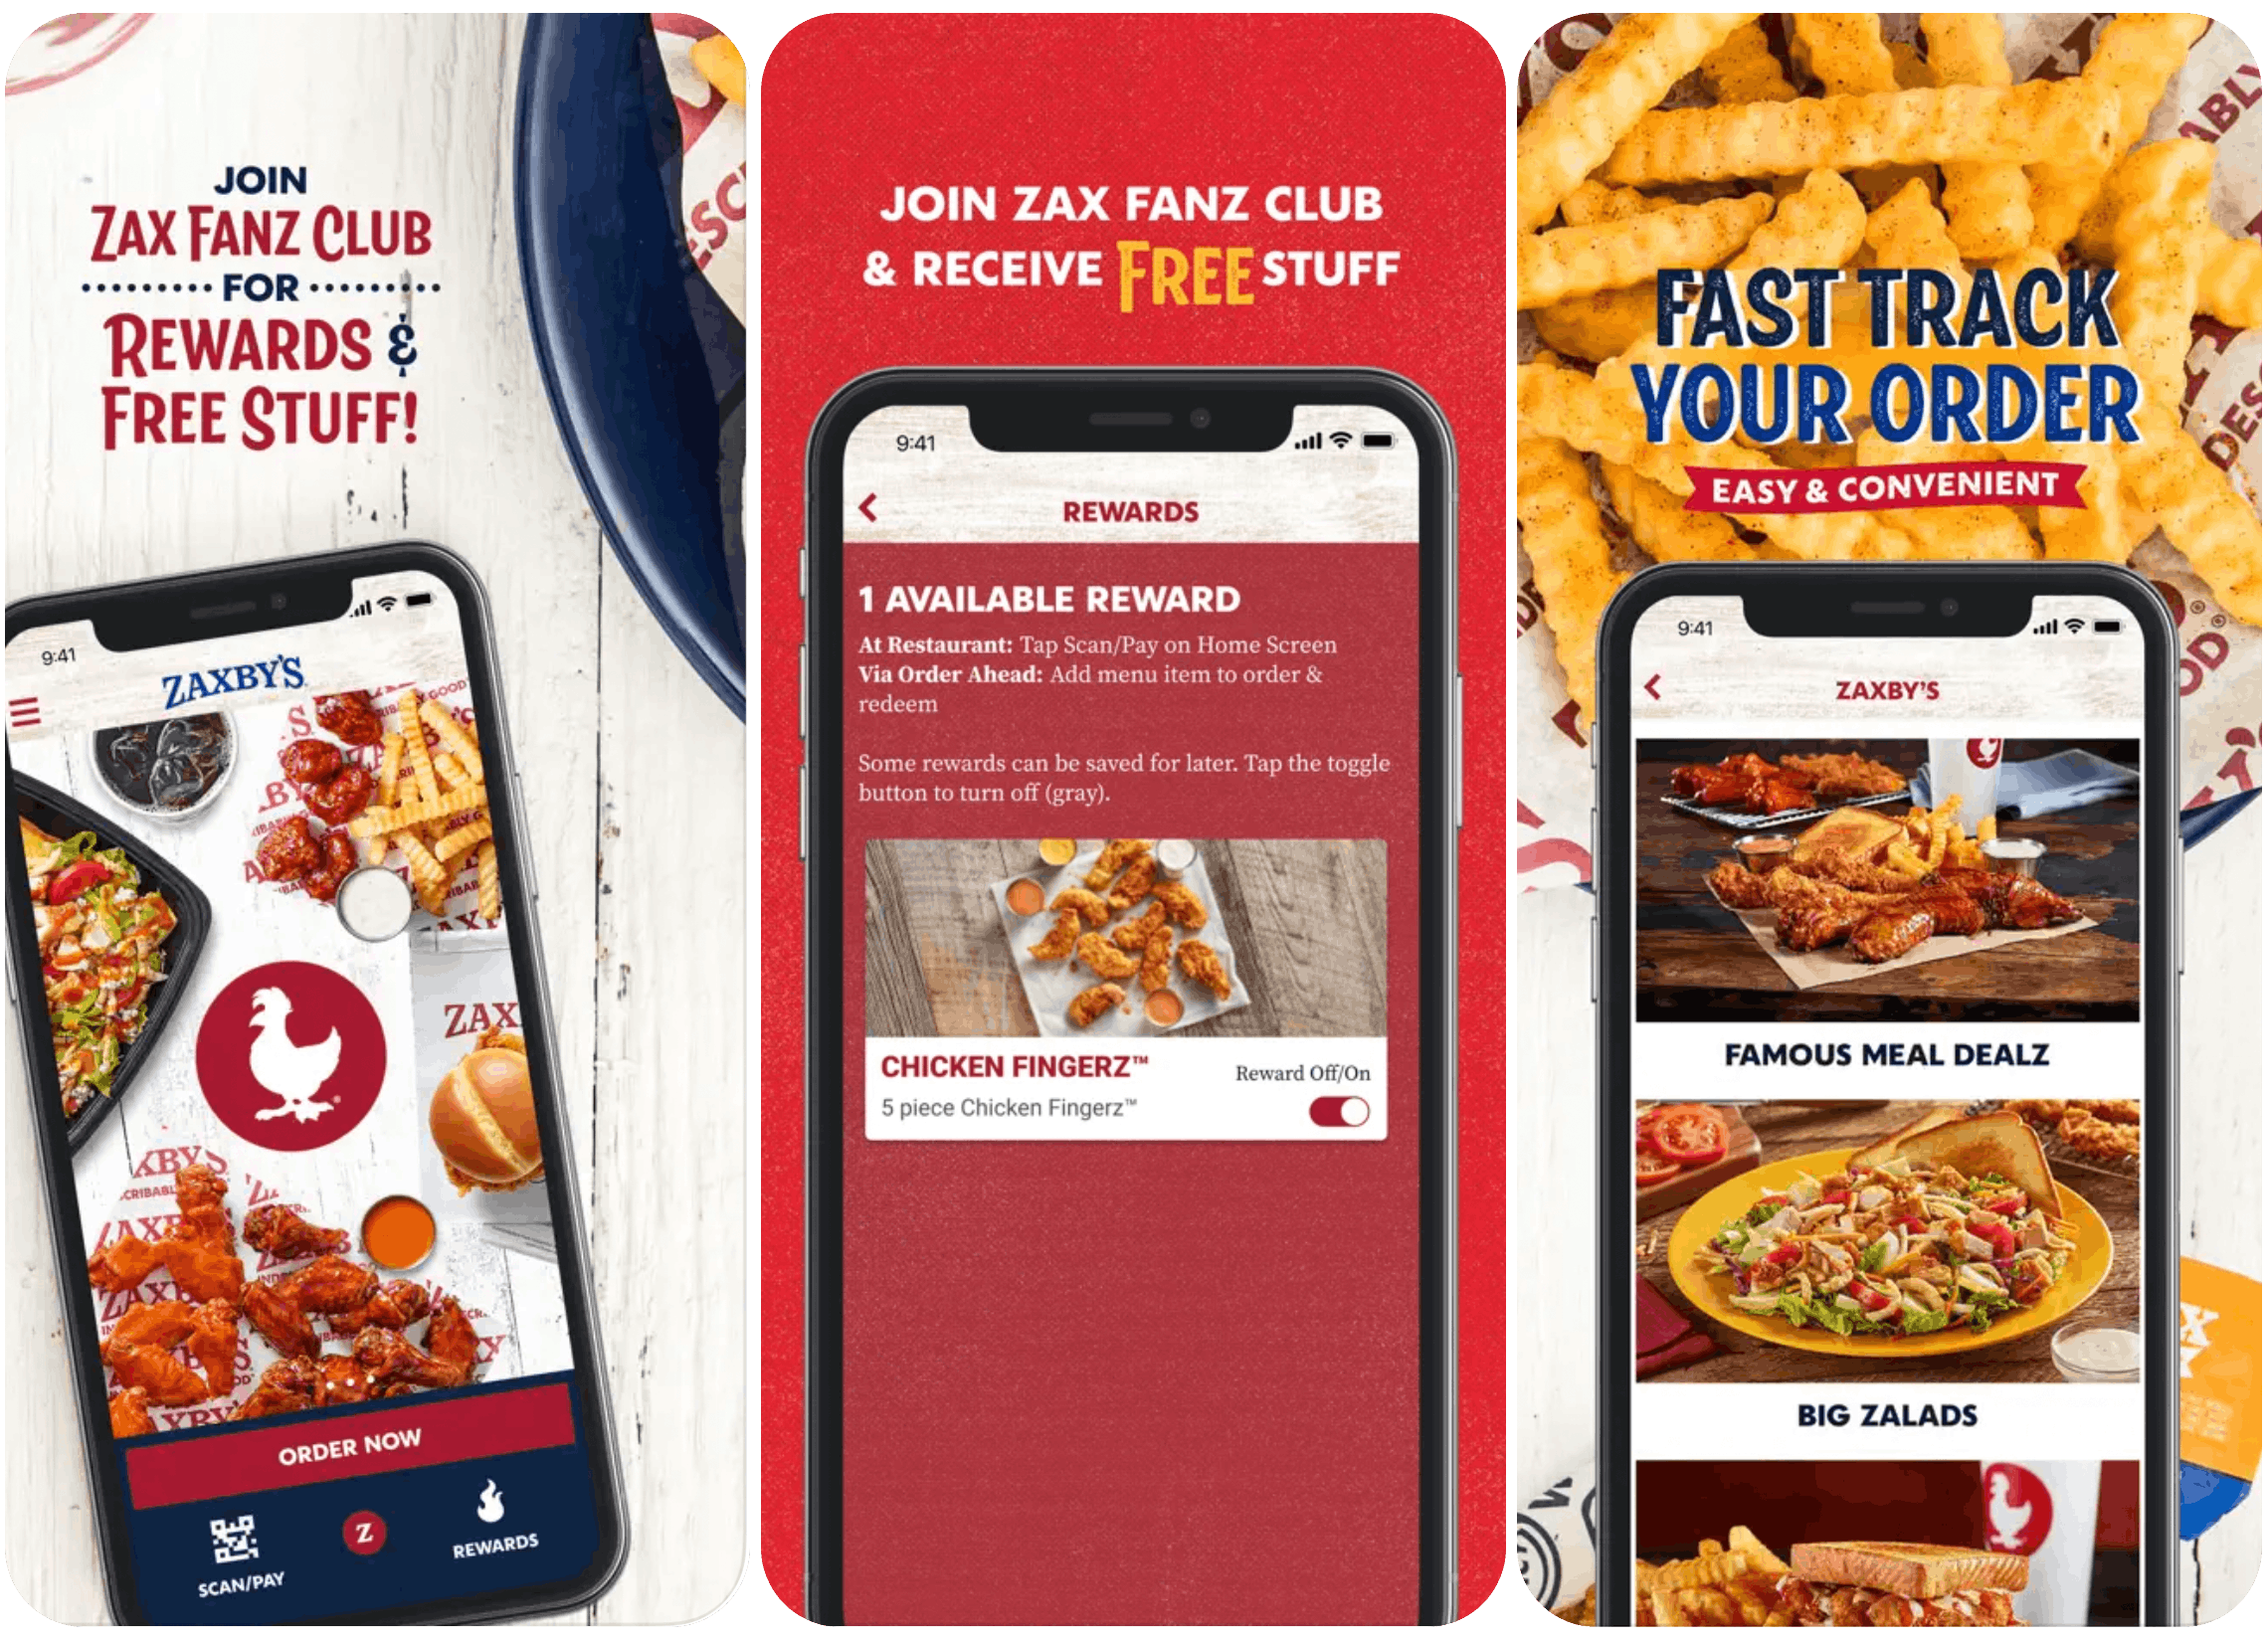 14 Ways Score Free Zaxby's Coupons, Deals, and Food The Krazy Coupon Lady